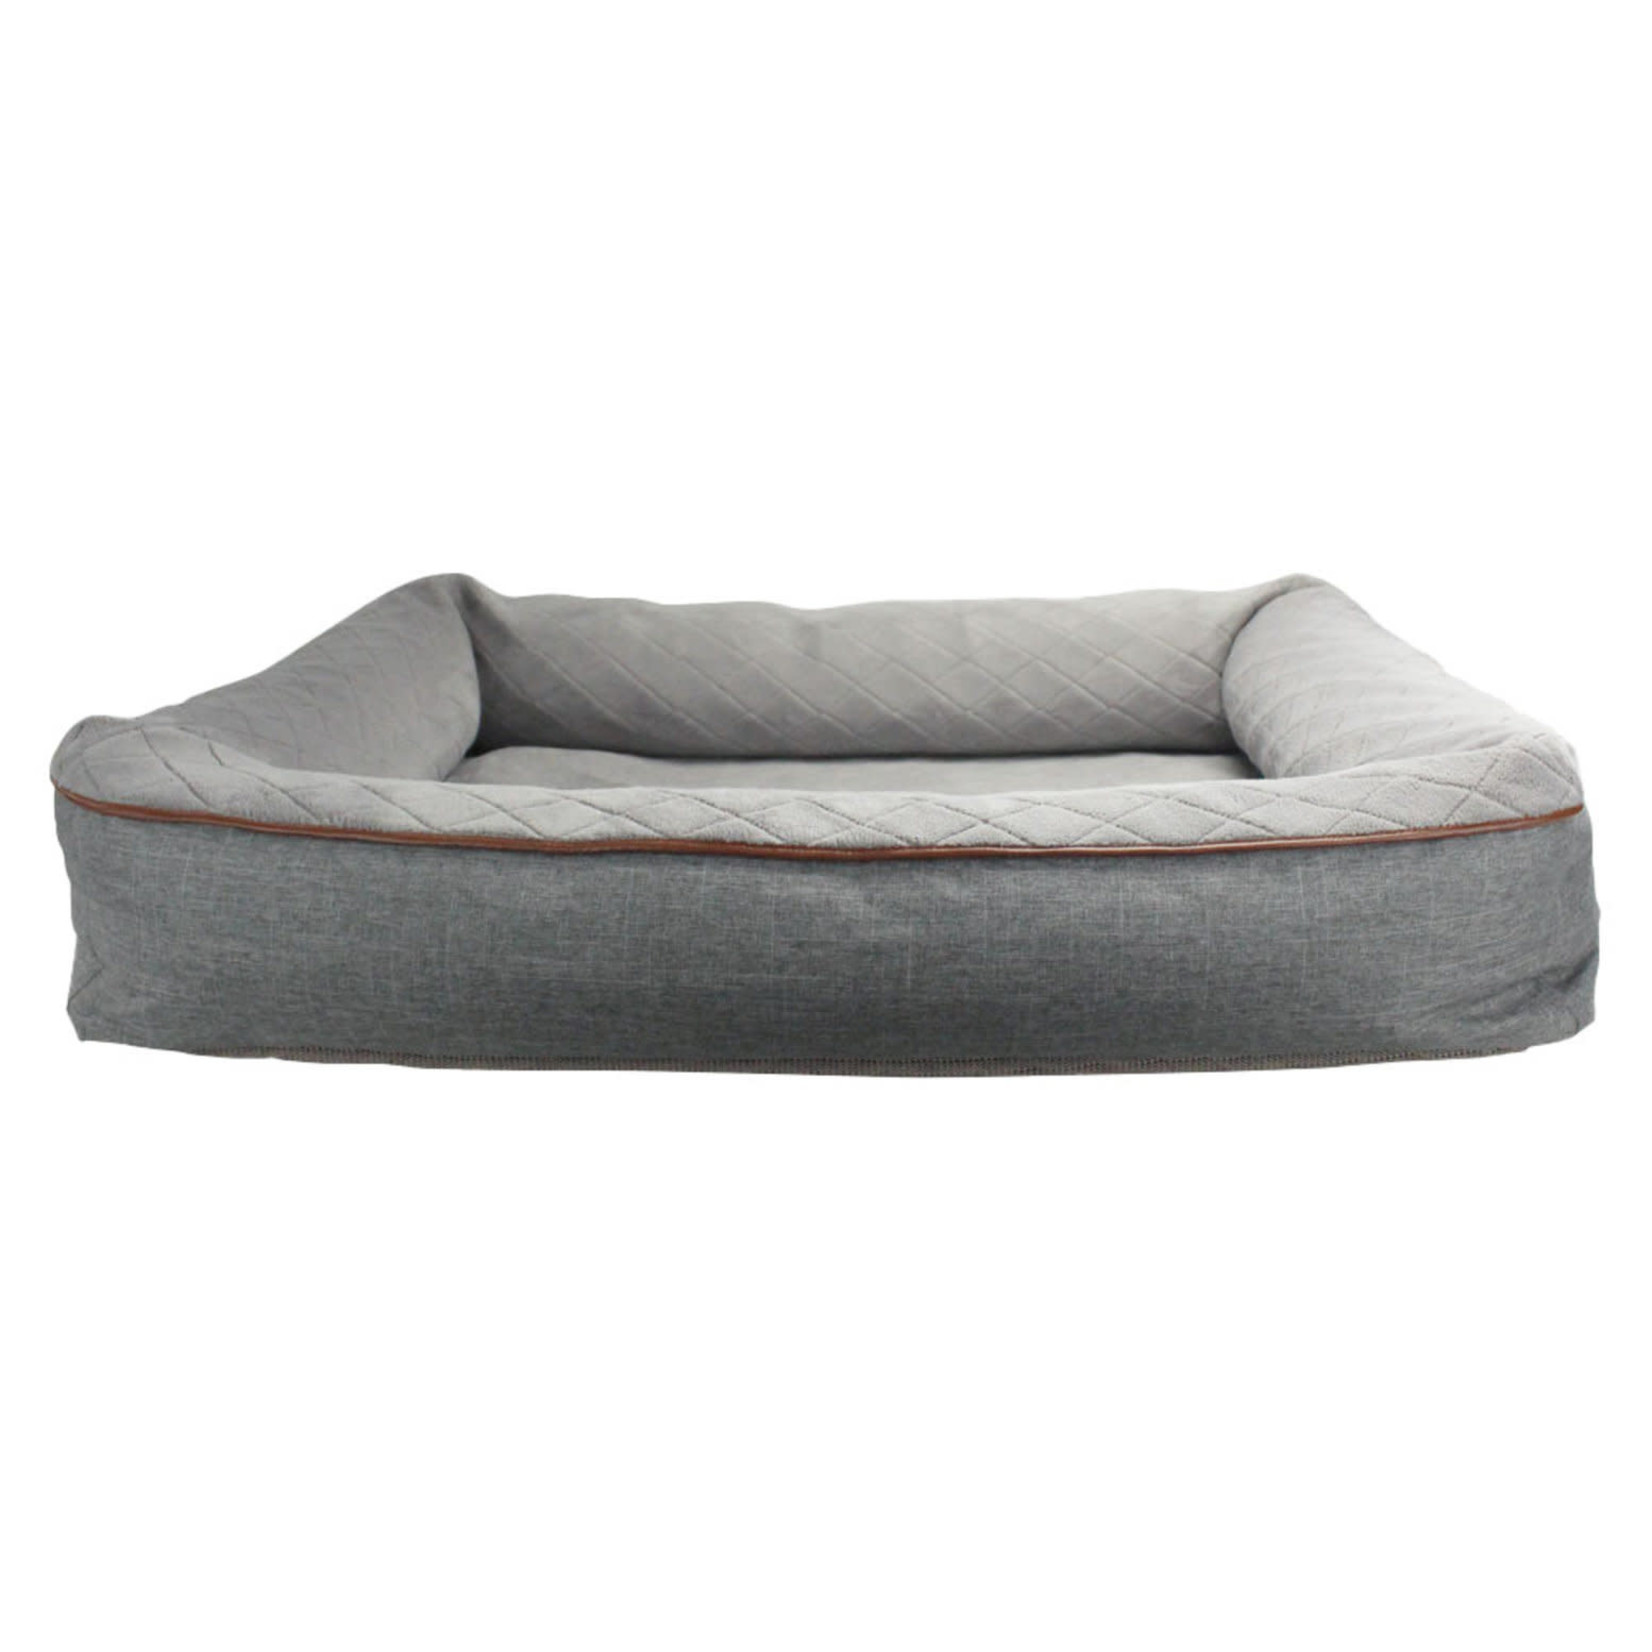 Be One Breed Be One Breed: Snuggle Bed: Light Grey